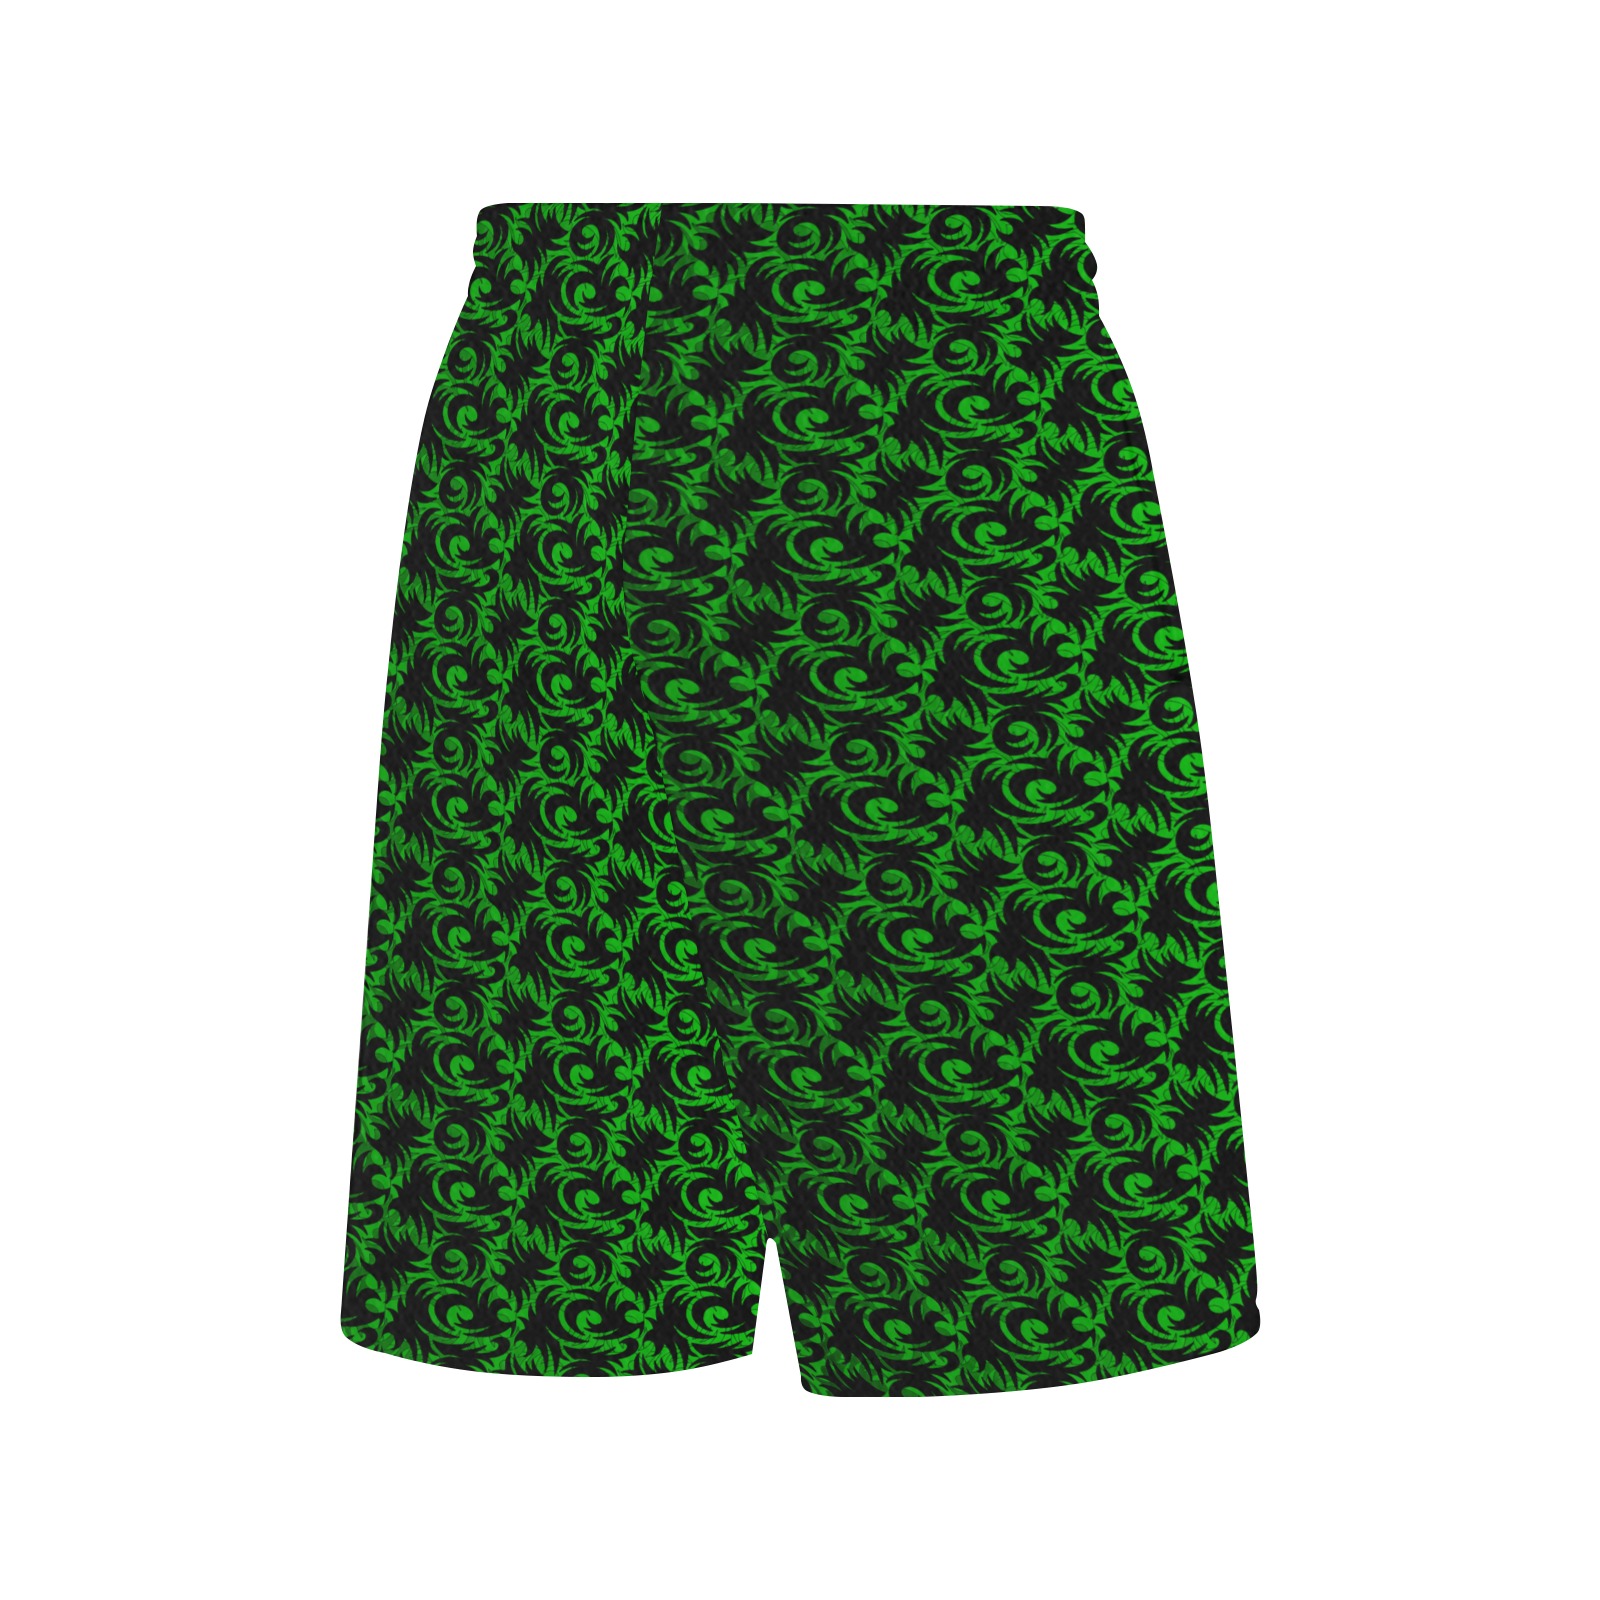 green swirl All Over Print Basketball Shorts with Pocket